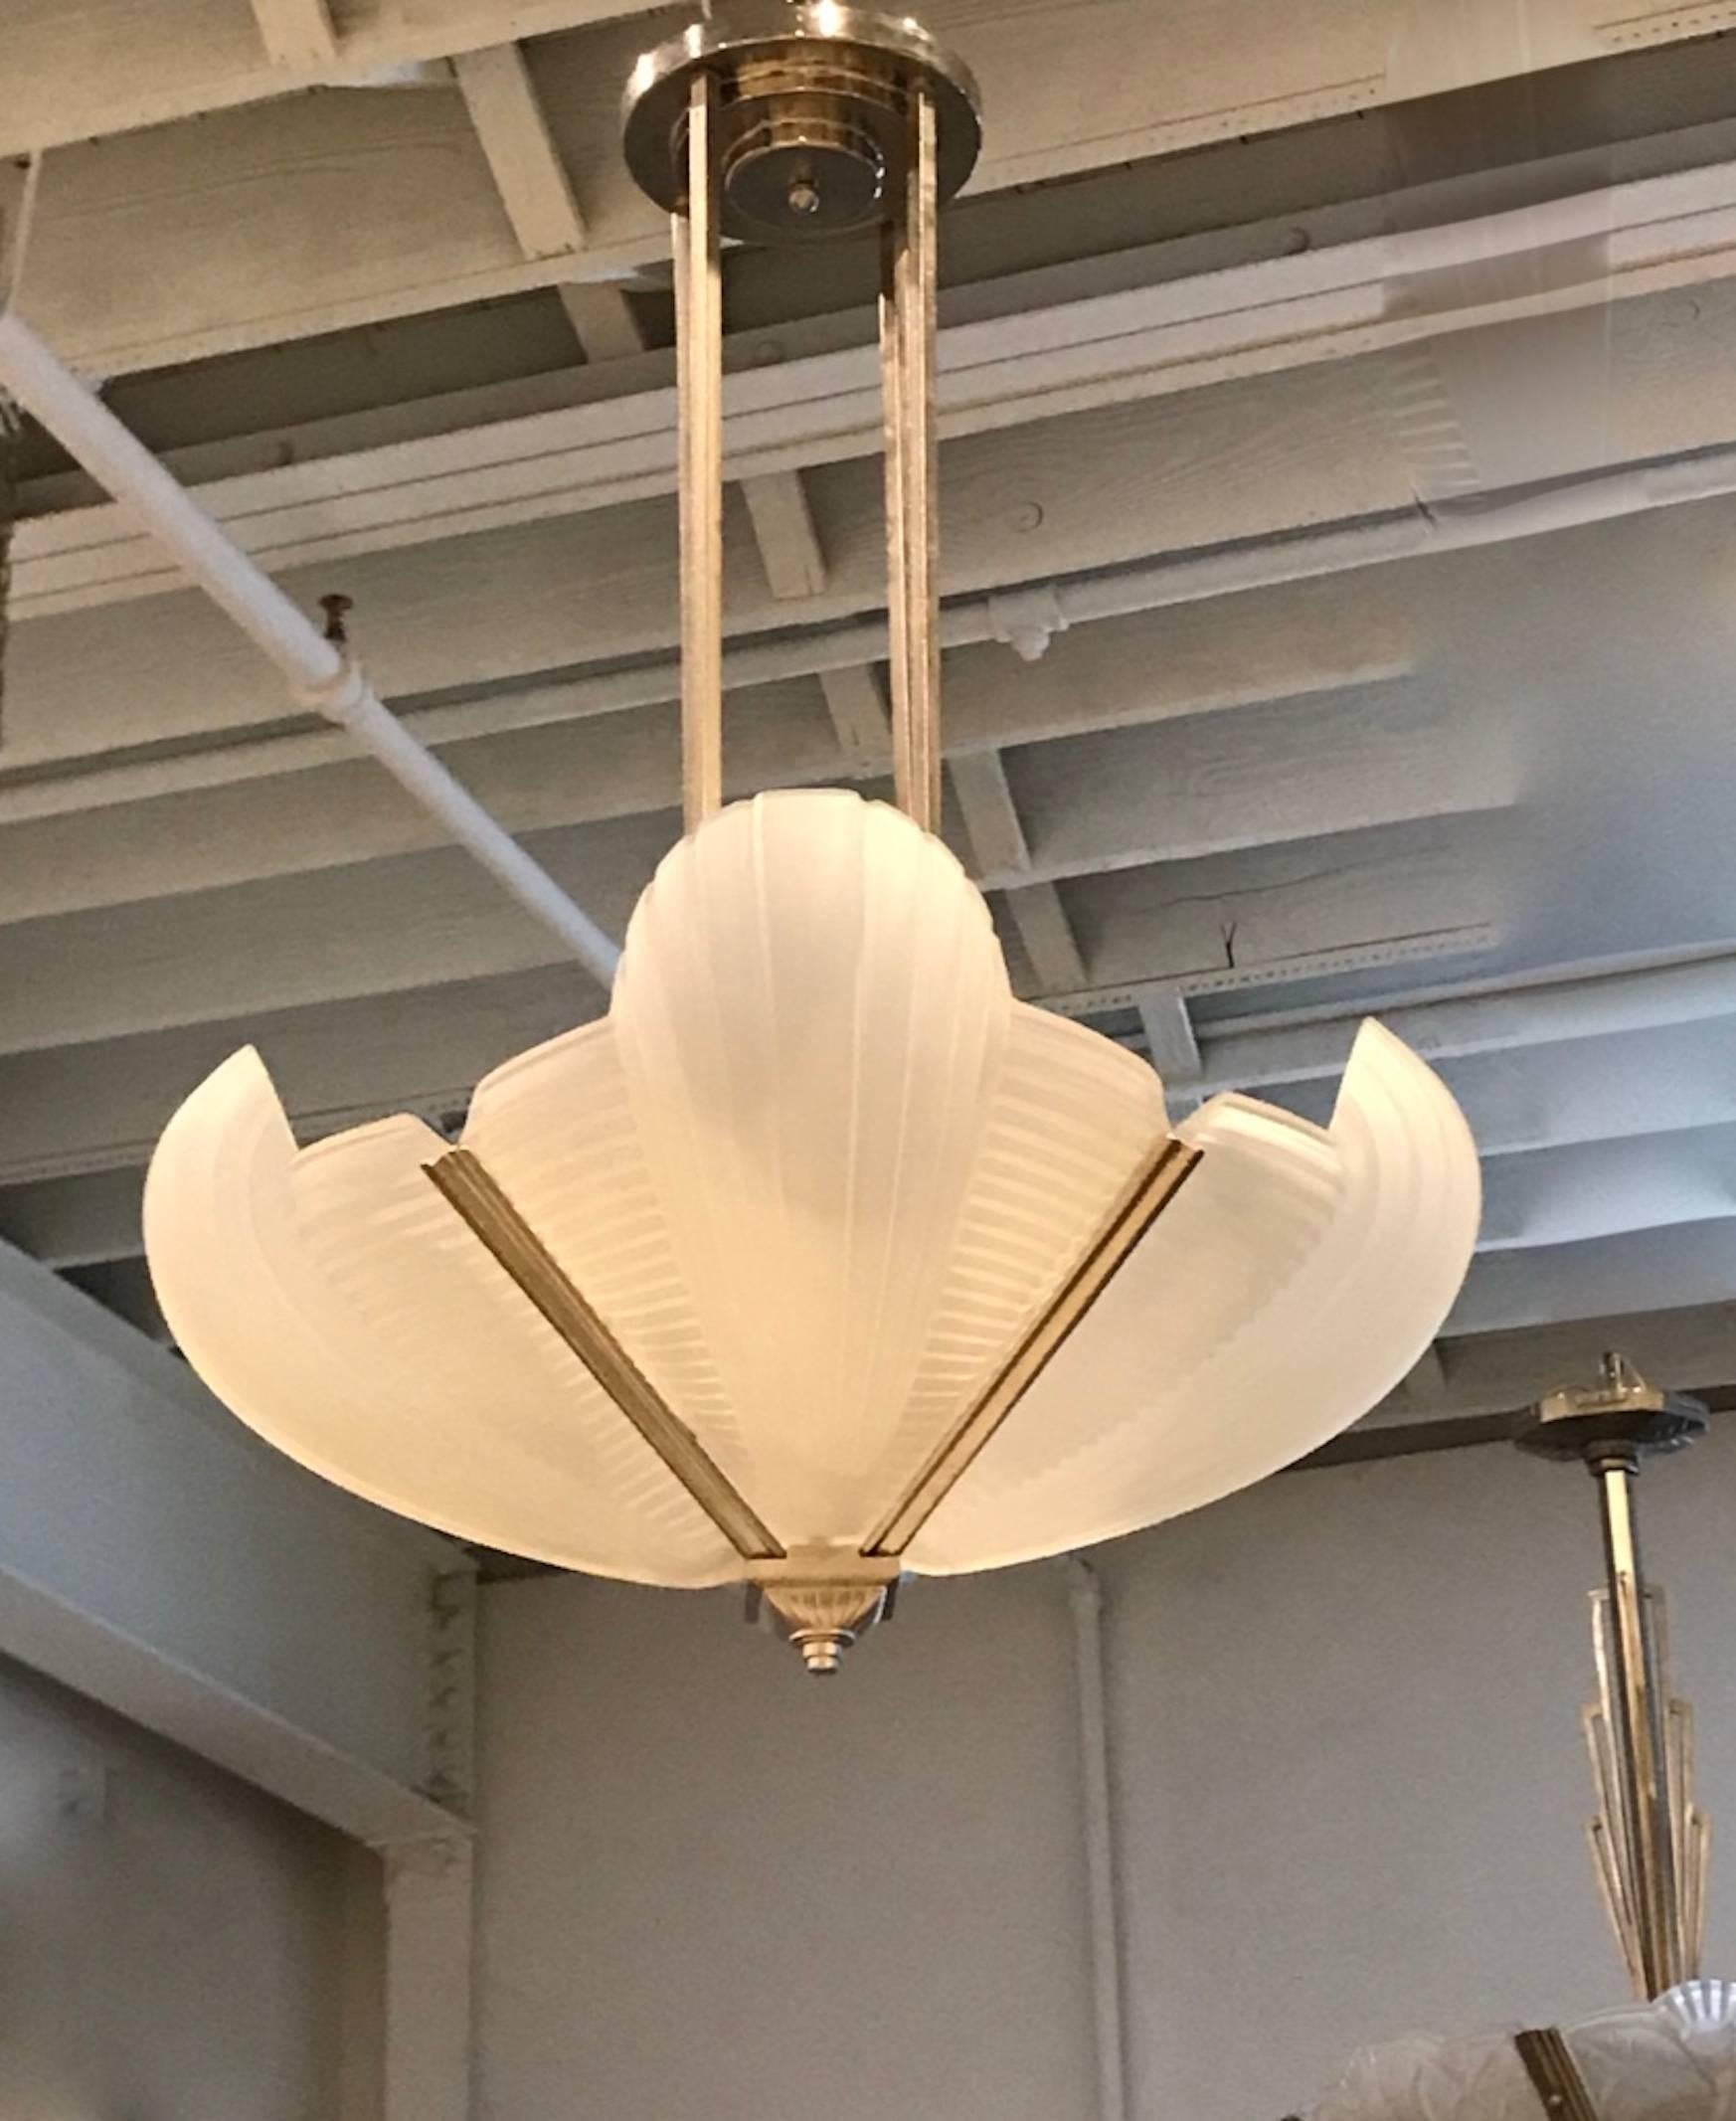 Stunning French Art Deco chandelier by Atelier Petitot. Having four clear frosted glass skyscraper panels with vertical and horizontal ribbed design details. Shades rests on a geometric deco design frame in silvered nickel finish. Having a beautiful